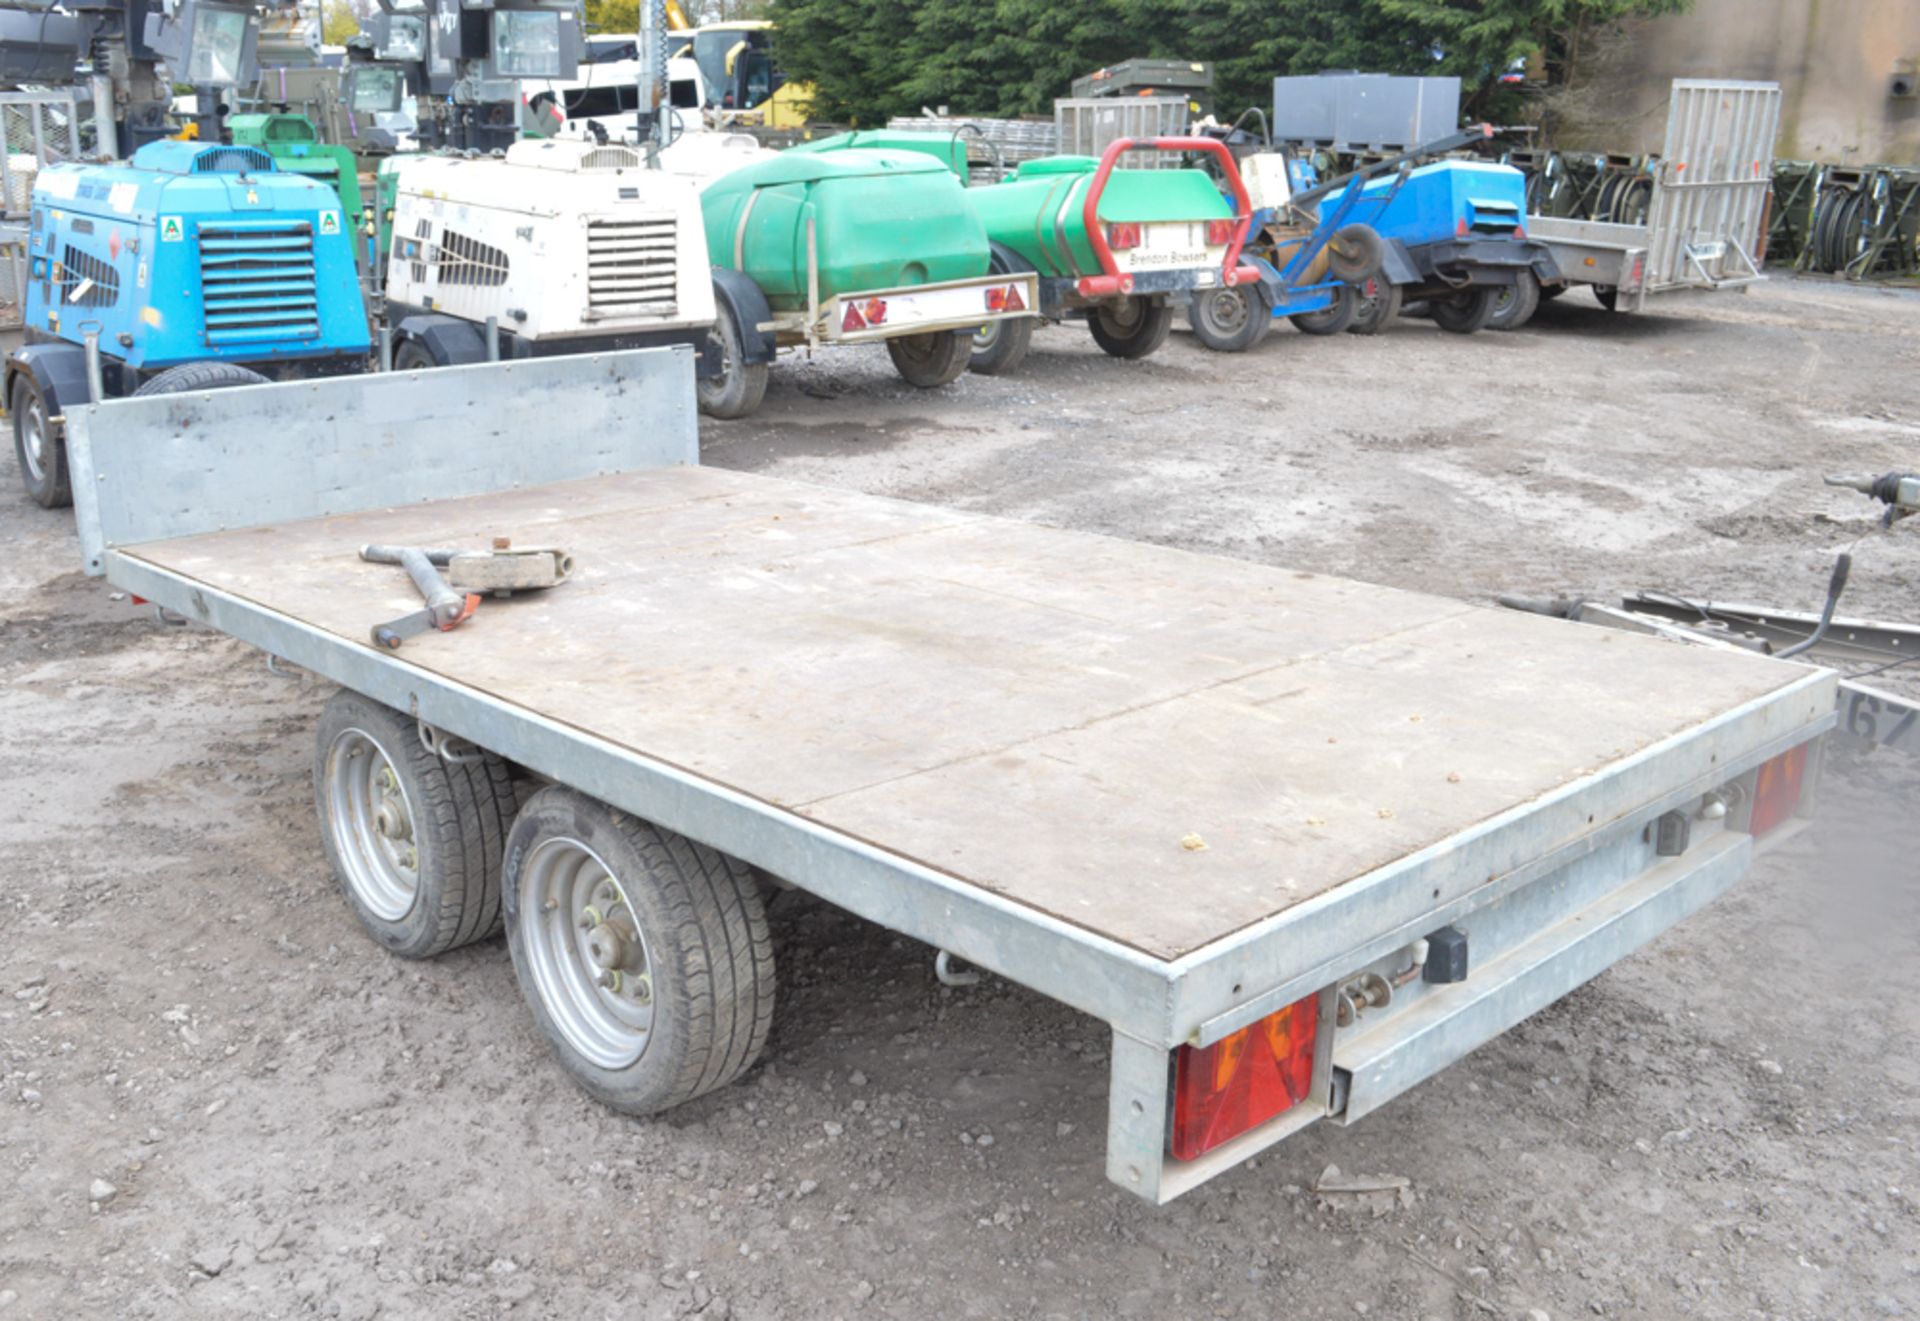 Indespension 10 ft x 5 ft tandem axle flat bed trailer A559983 - Image 2 of 2